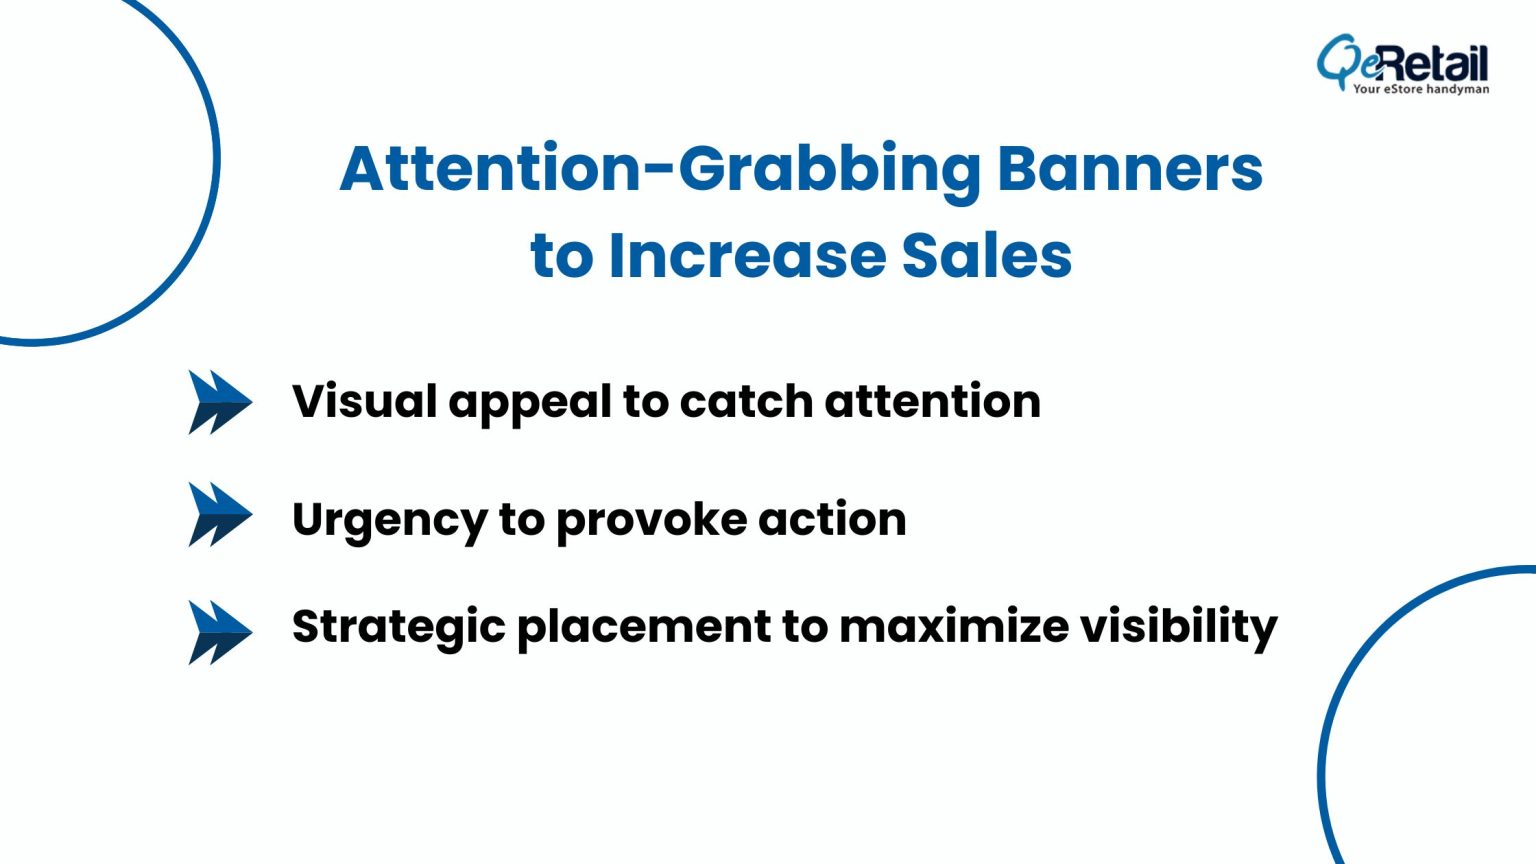 Attention-Grabbing-Banners-increases-sales